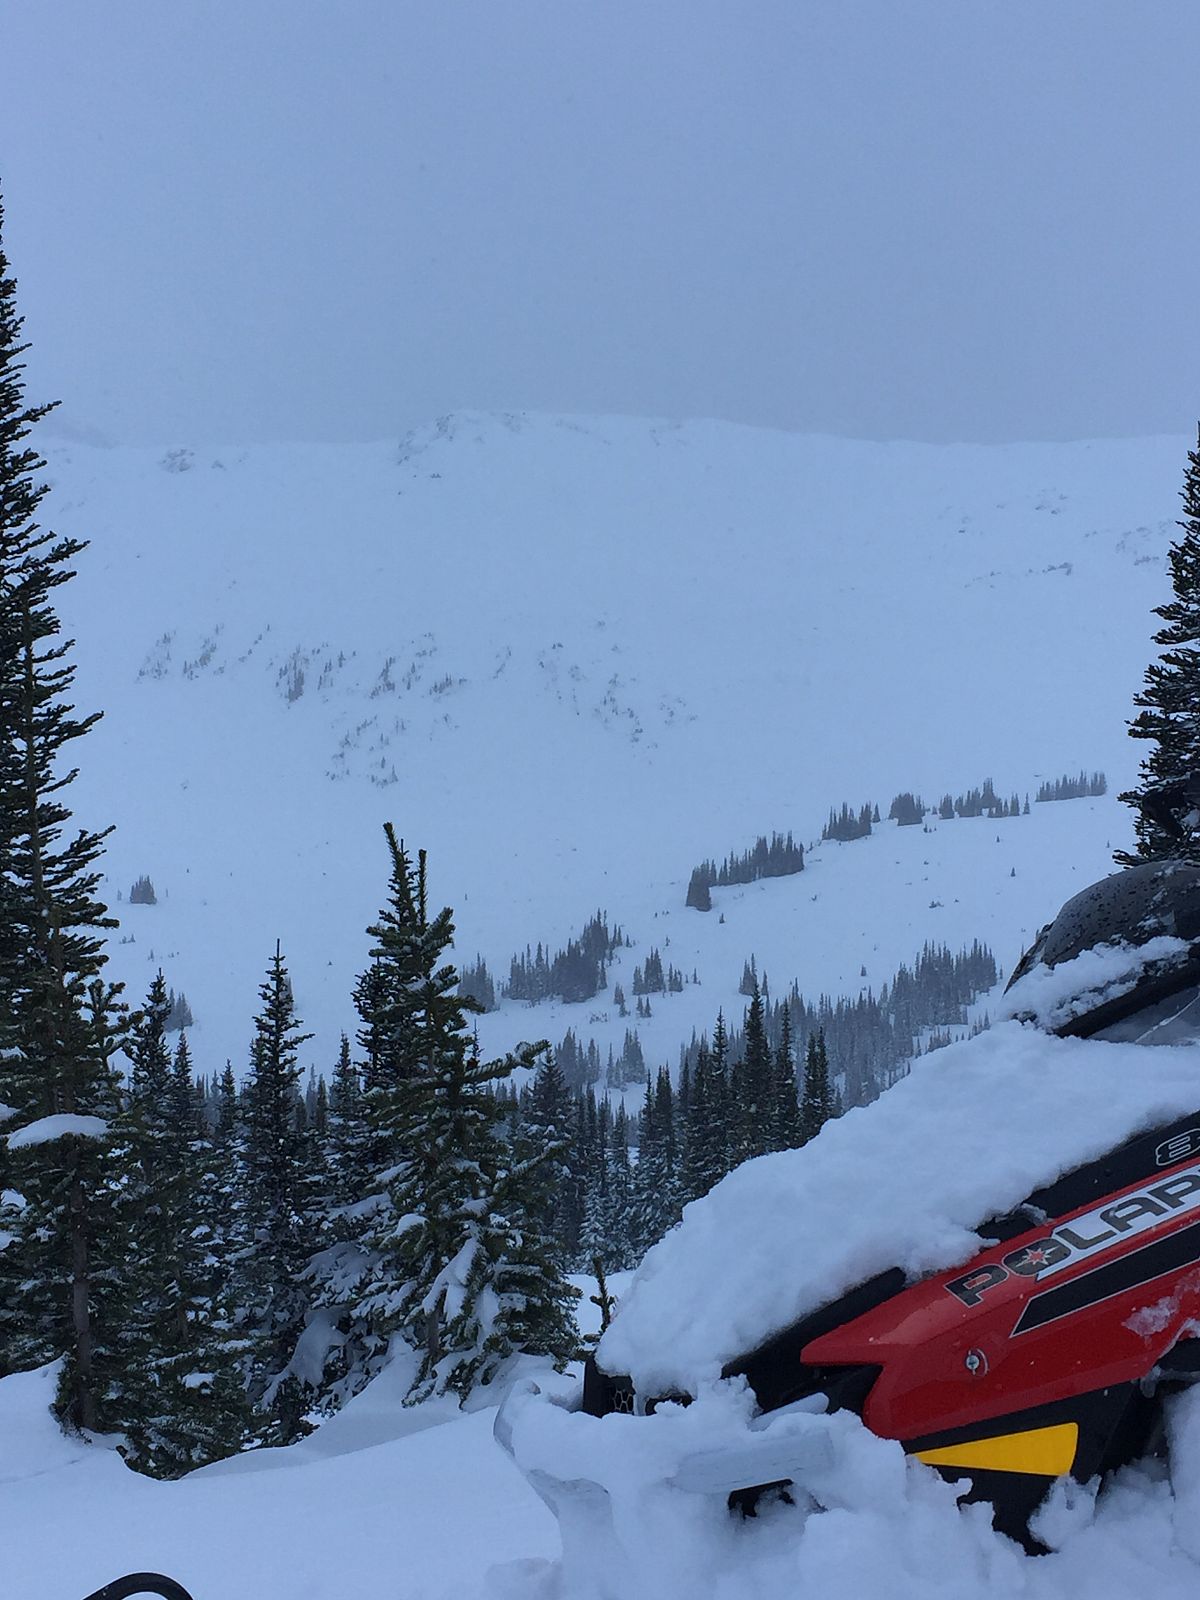 No sun, but there's powder